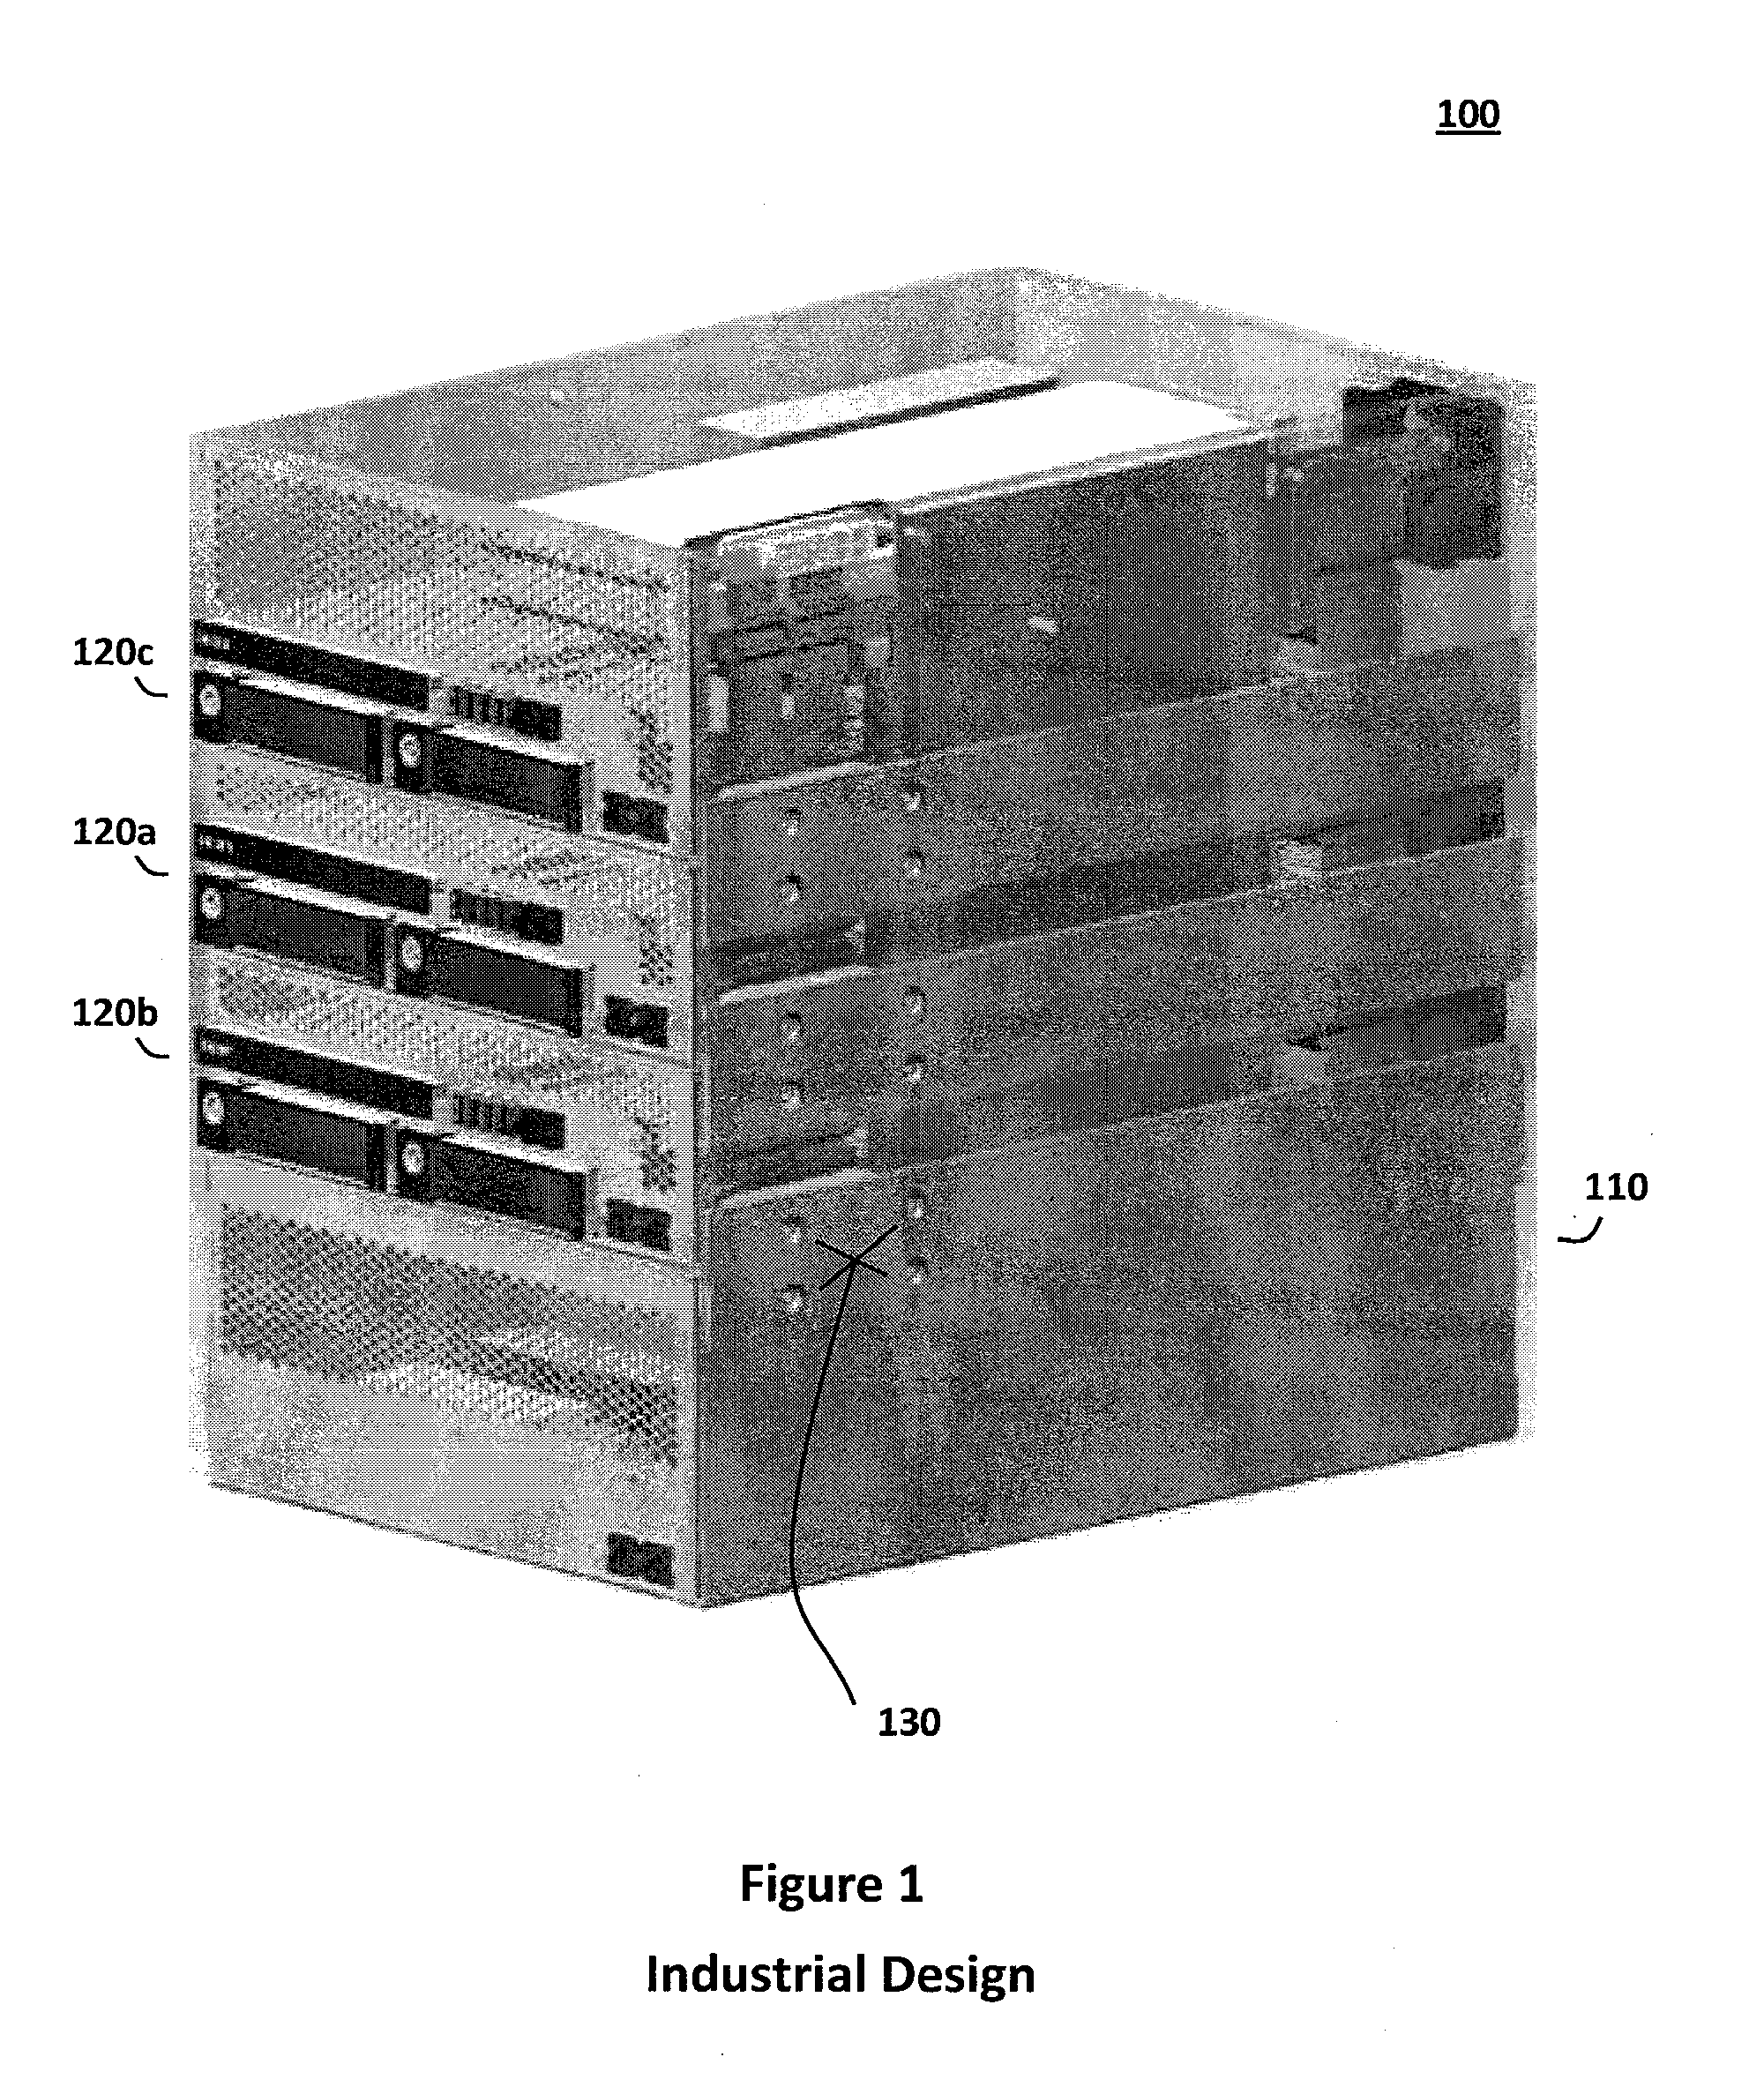 Adaptive computing system with modular control, switching, and power supply architecture